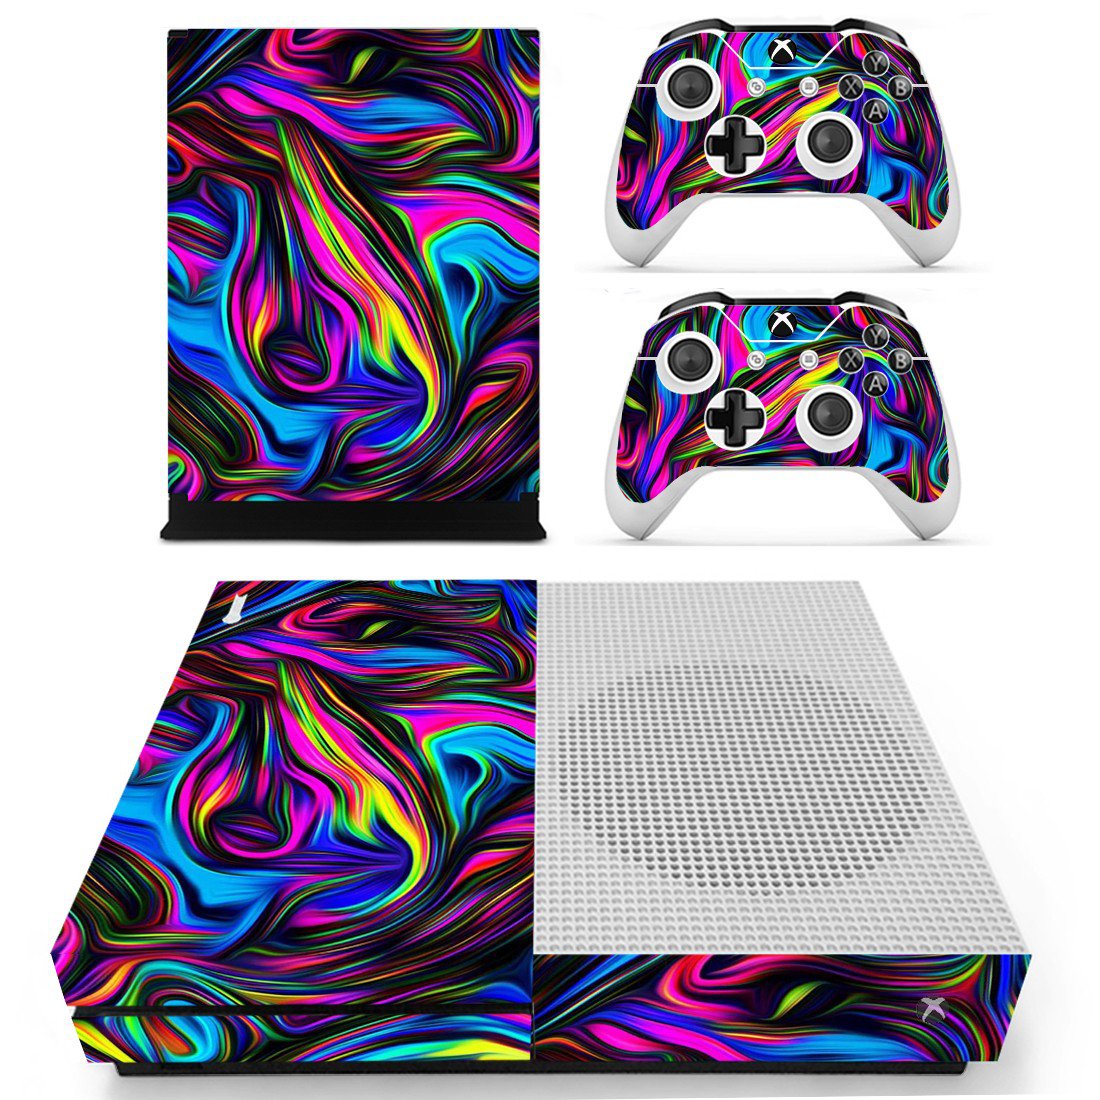 Xbox One S And Controllers Skin Sticker - Abstraction Design 2